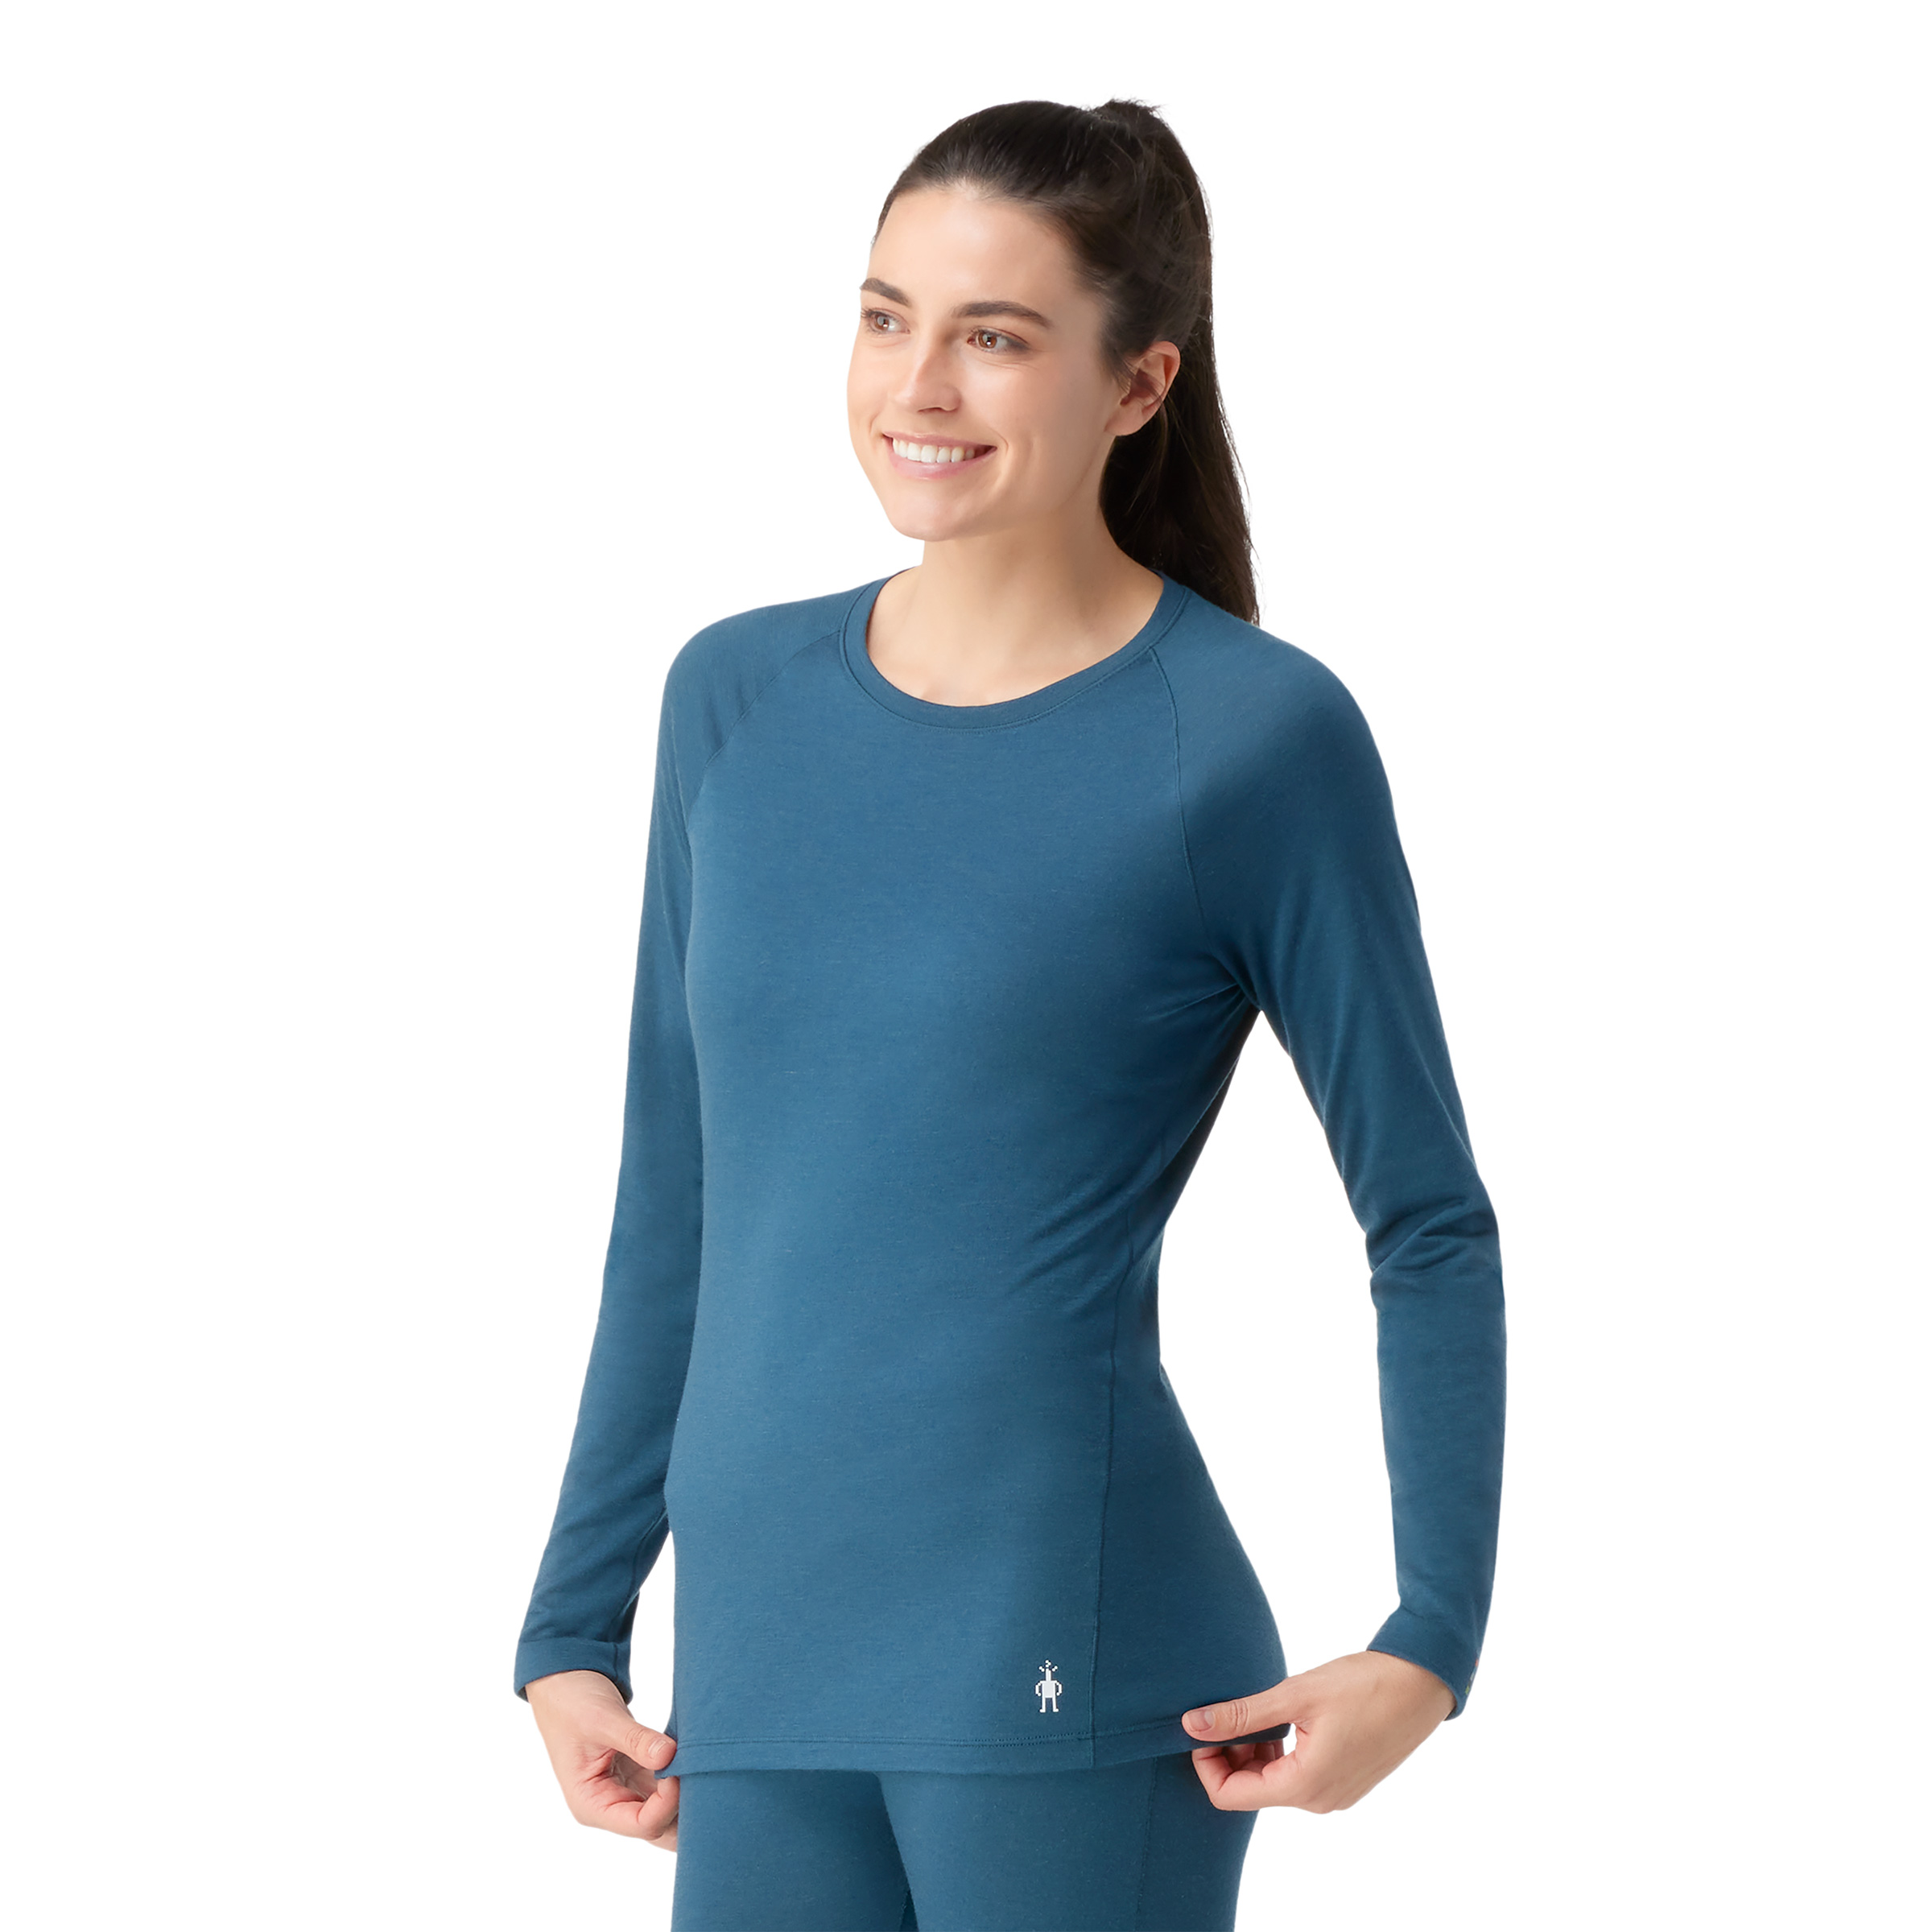 Kids' Classic Thermal Merino Base Layer Bottom by Smartwool - Abby